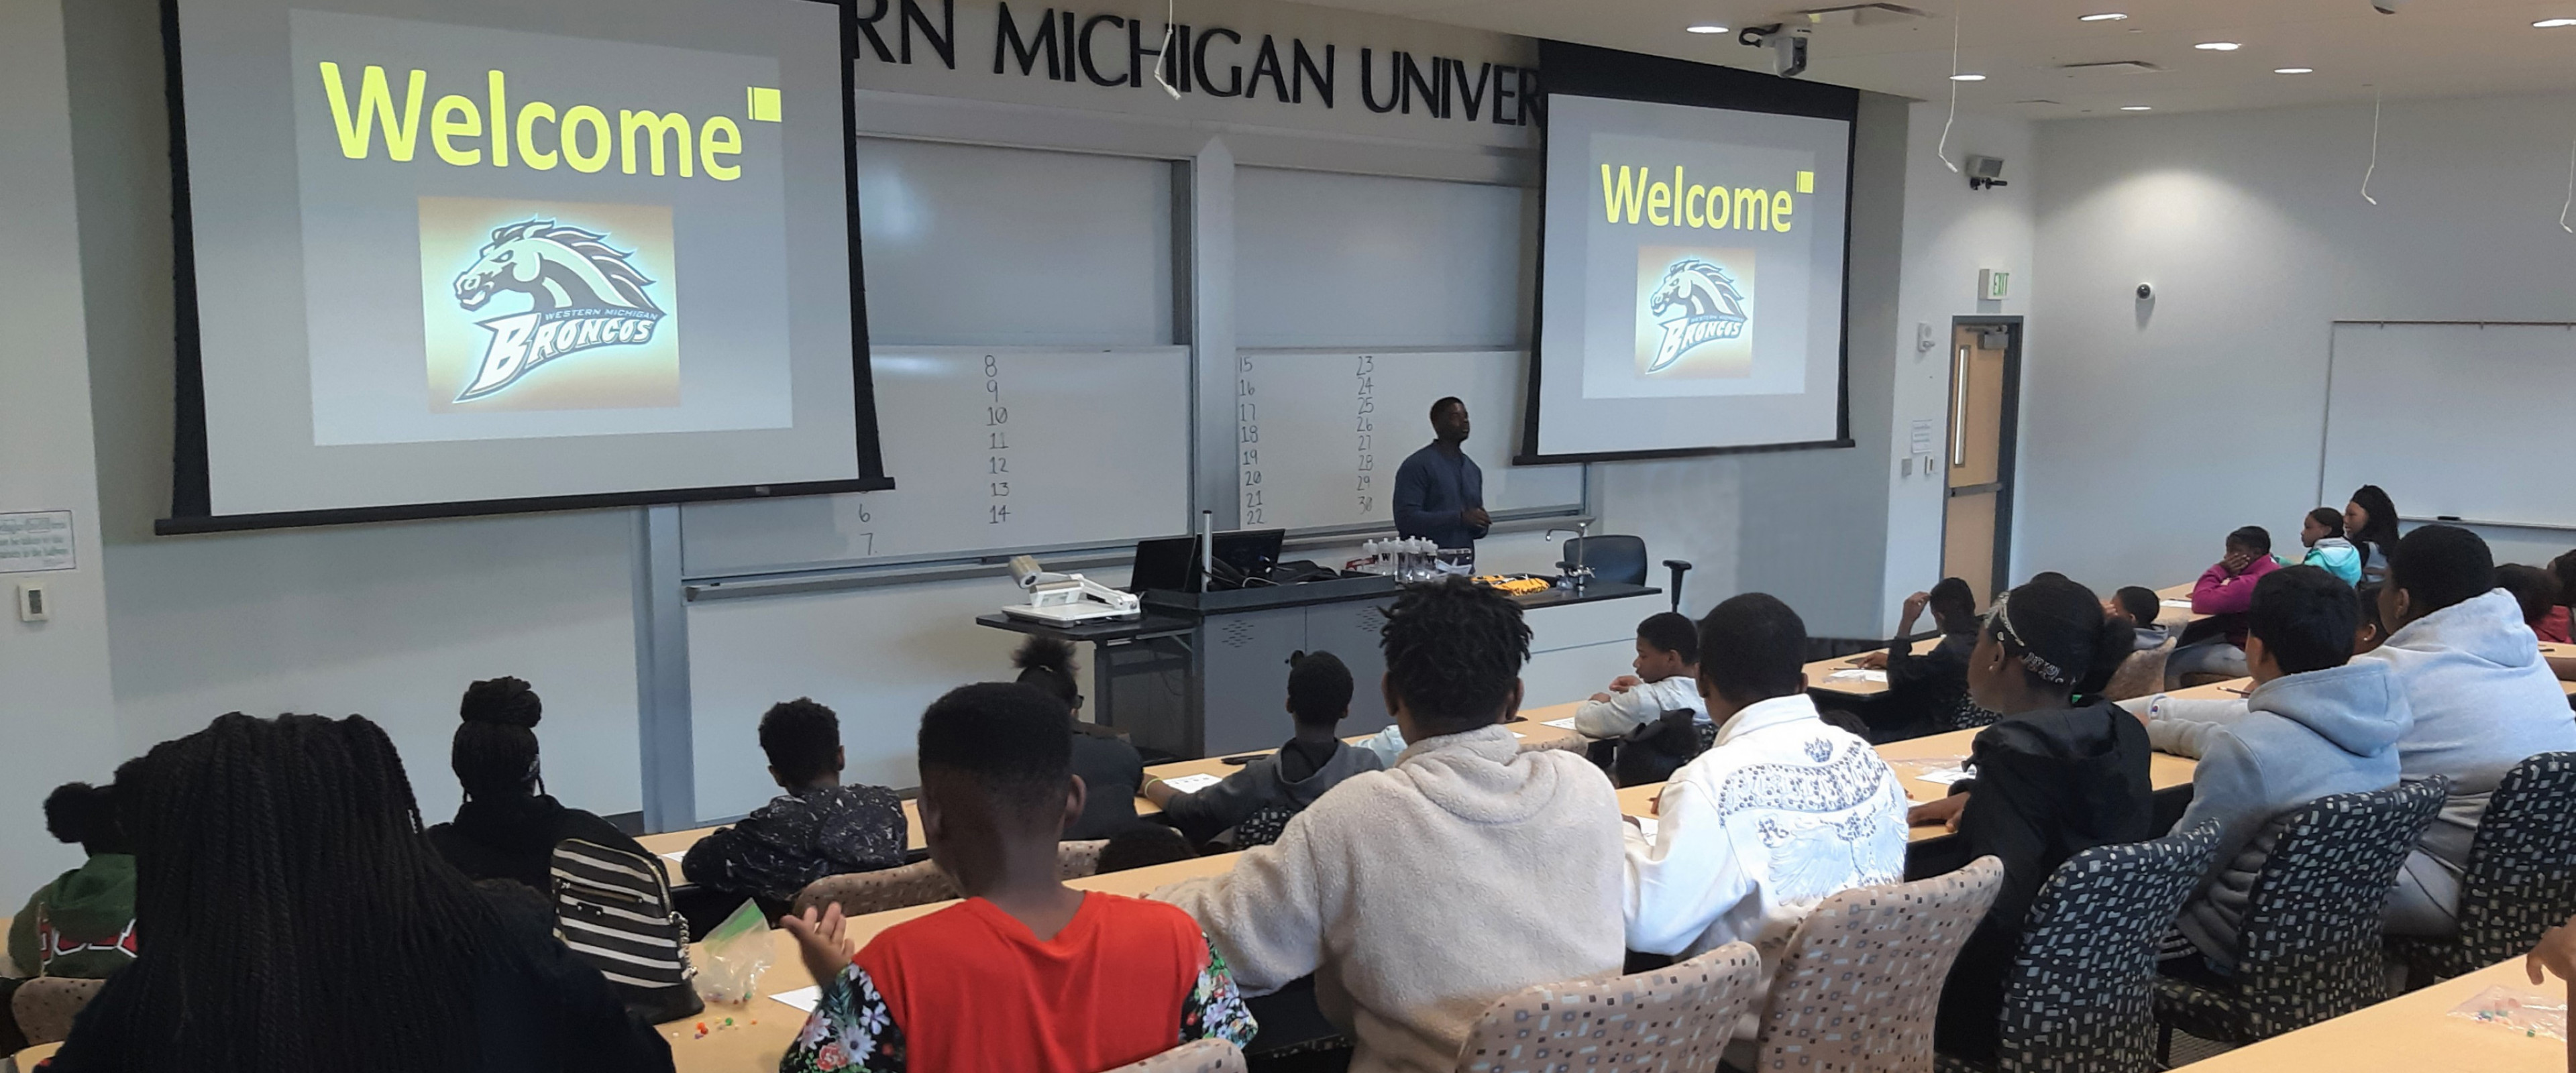 Students watching a WMU admissions presentation